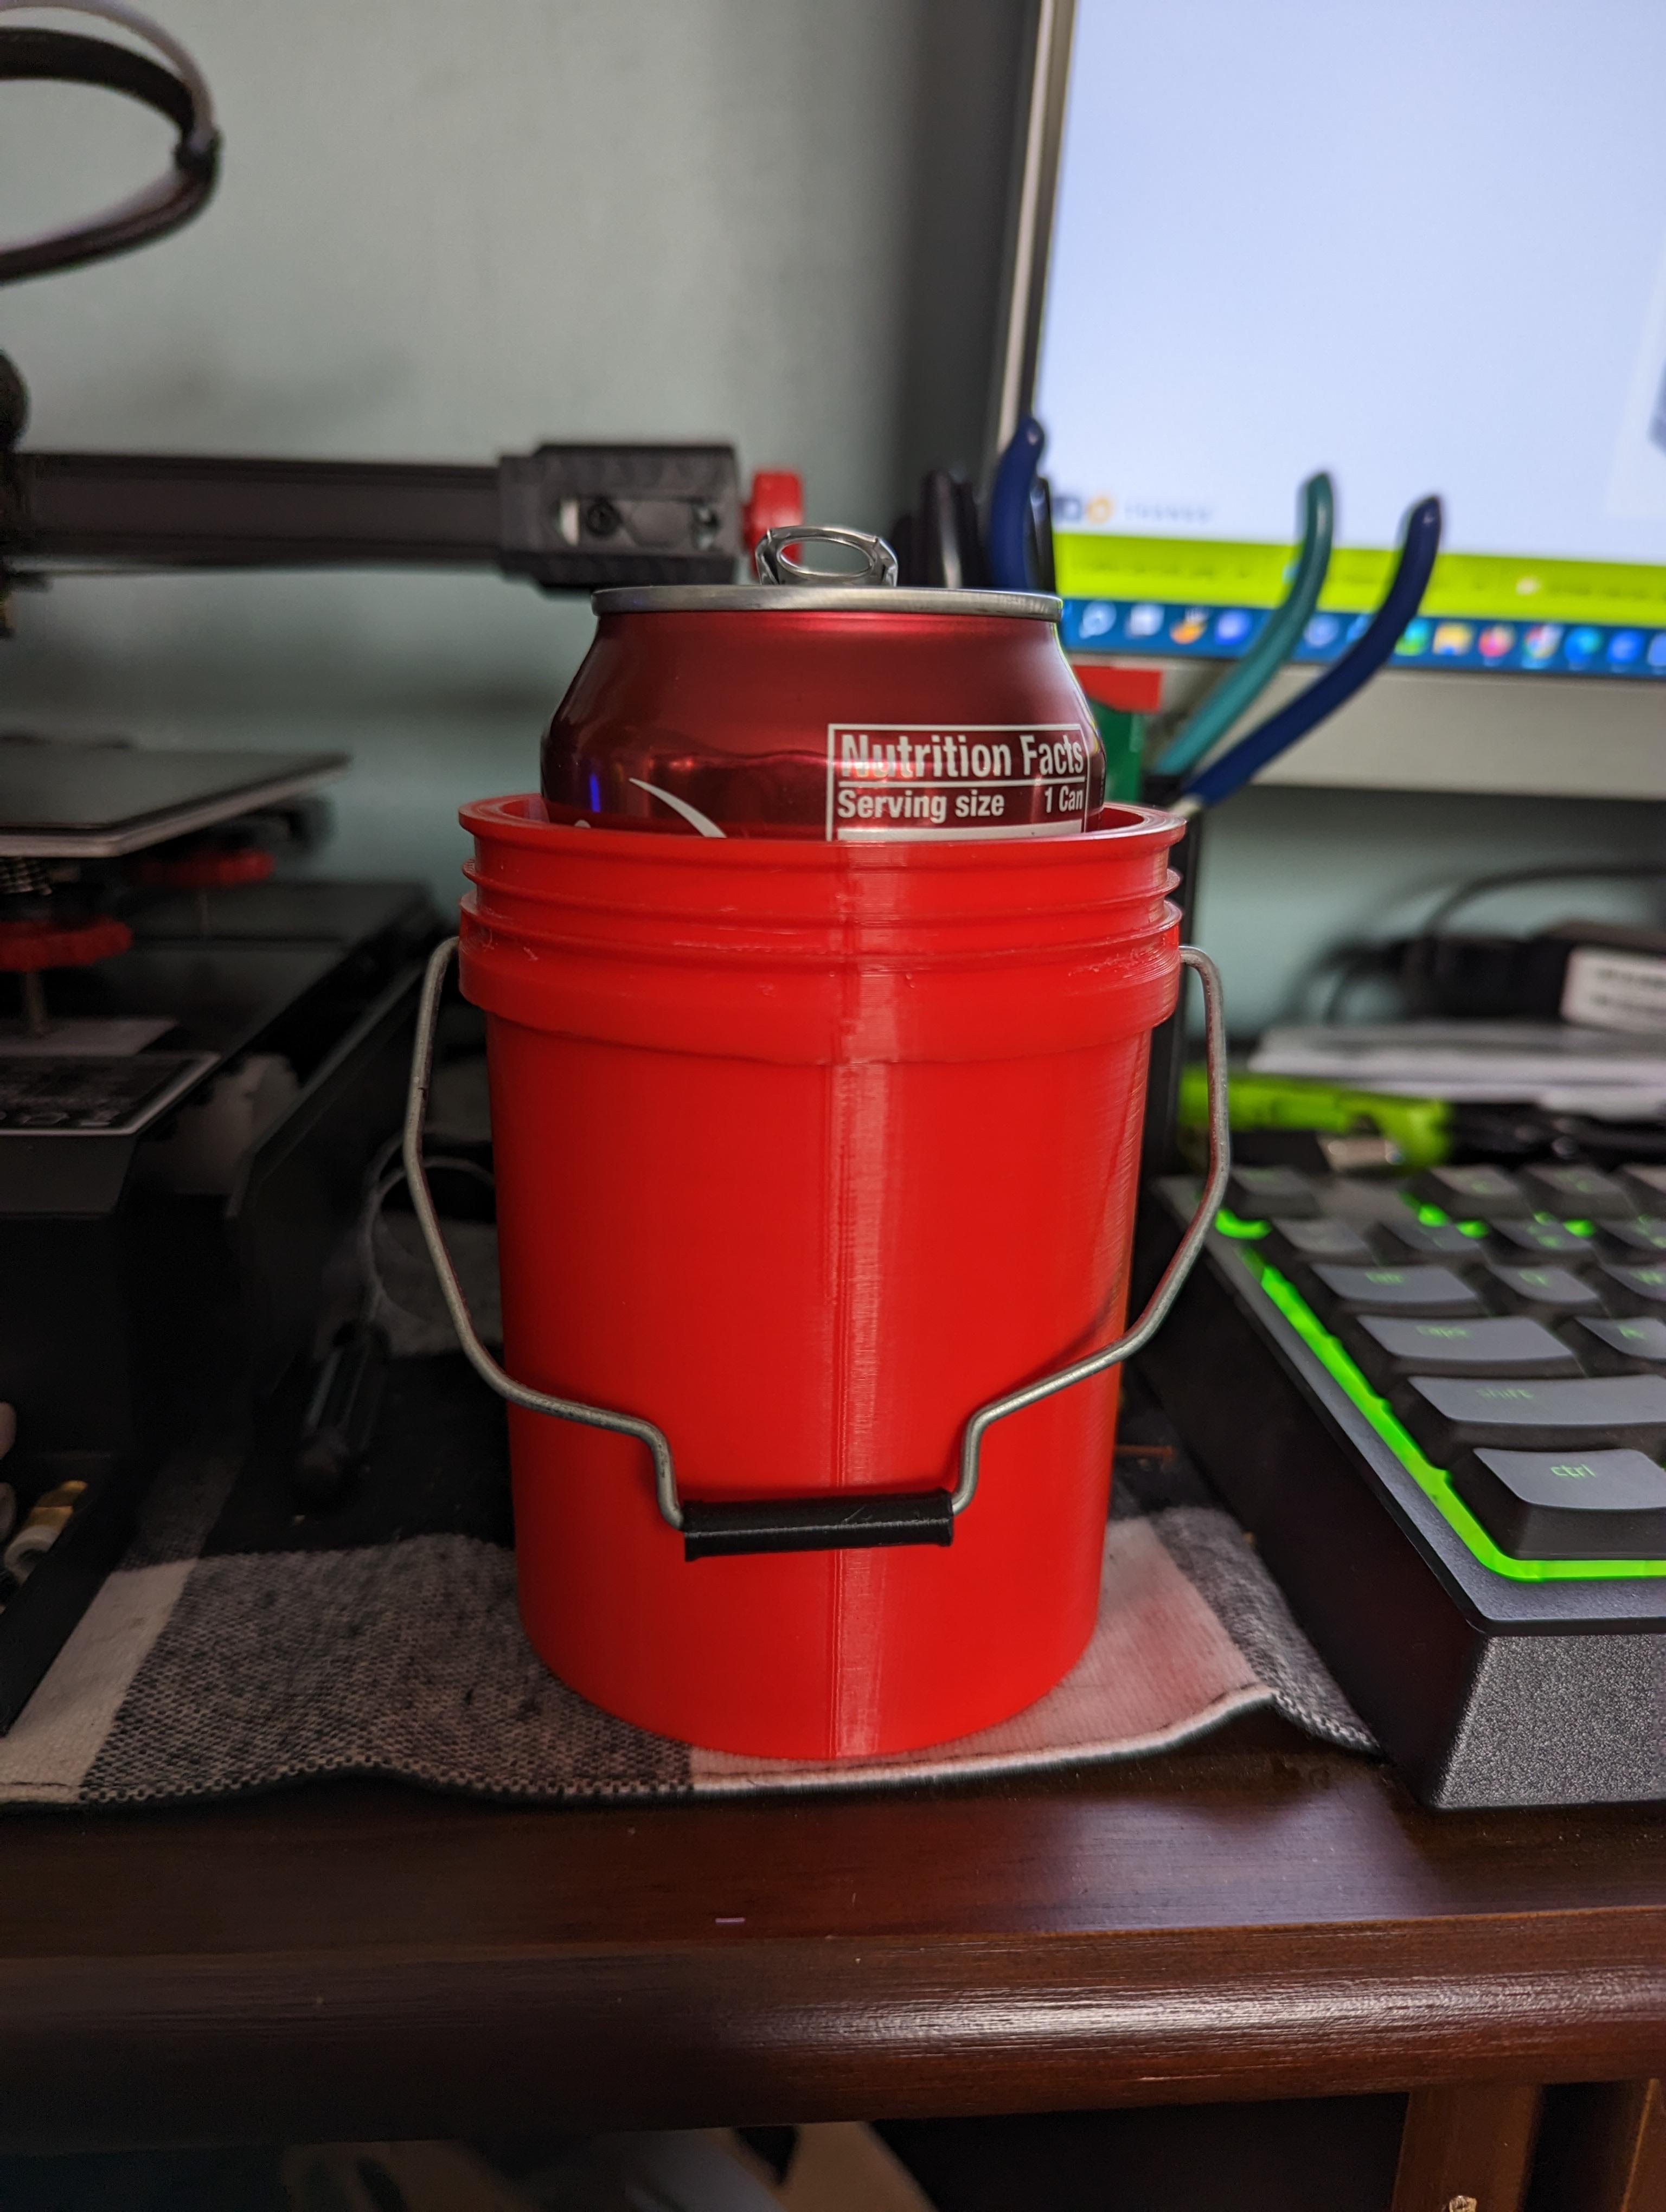 1:6 Scale Miniature Yeti Bucket With Lid 3D Printed 